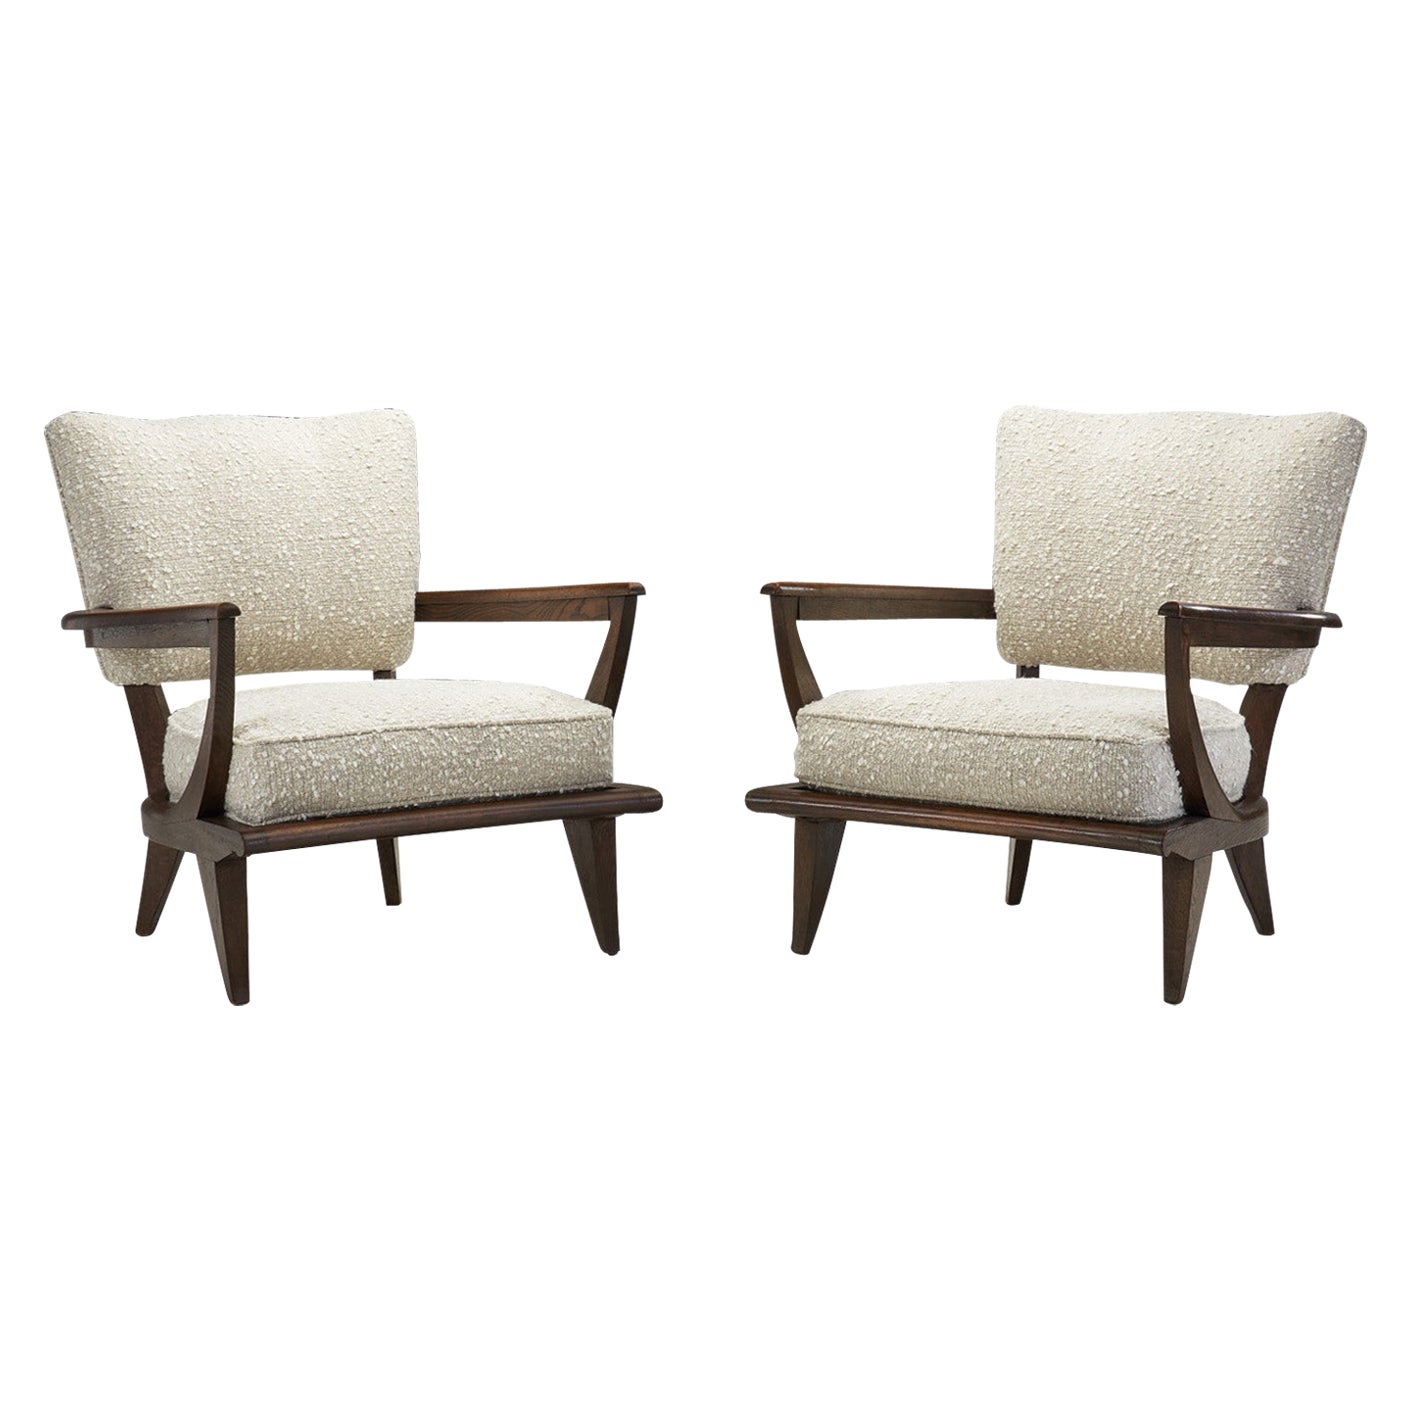 Etienne Henri-Martin "SK 250" Armchairs for Steiner, France, 1950s For Sale